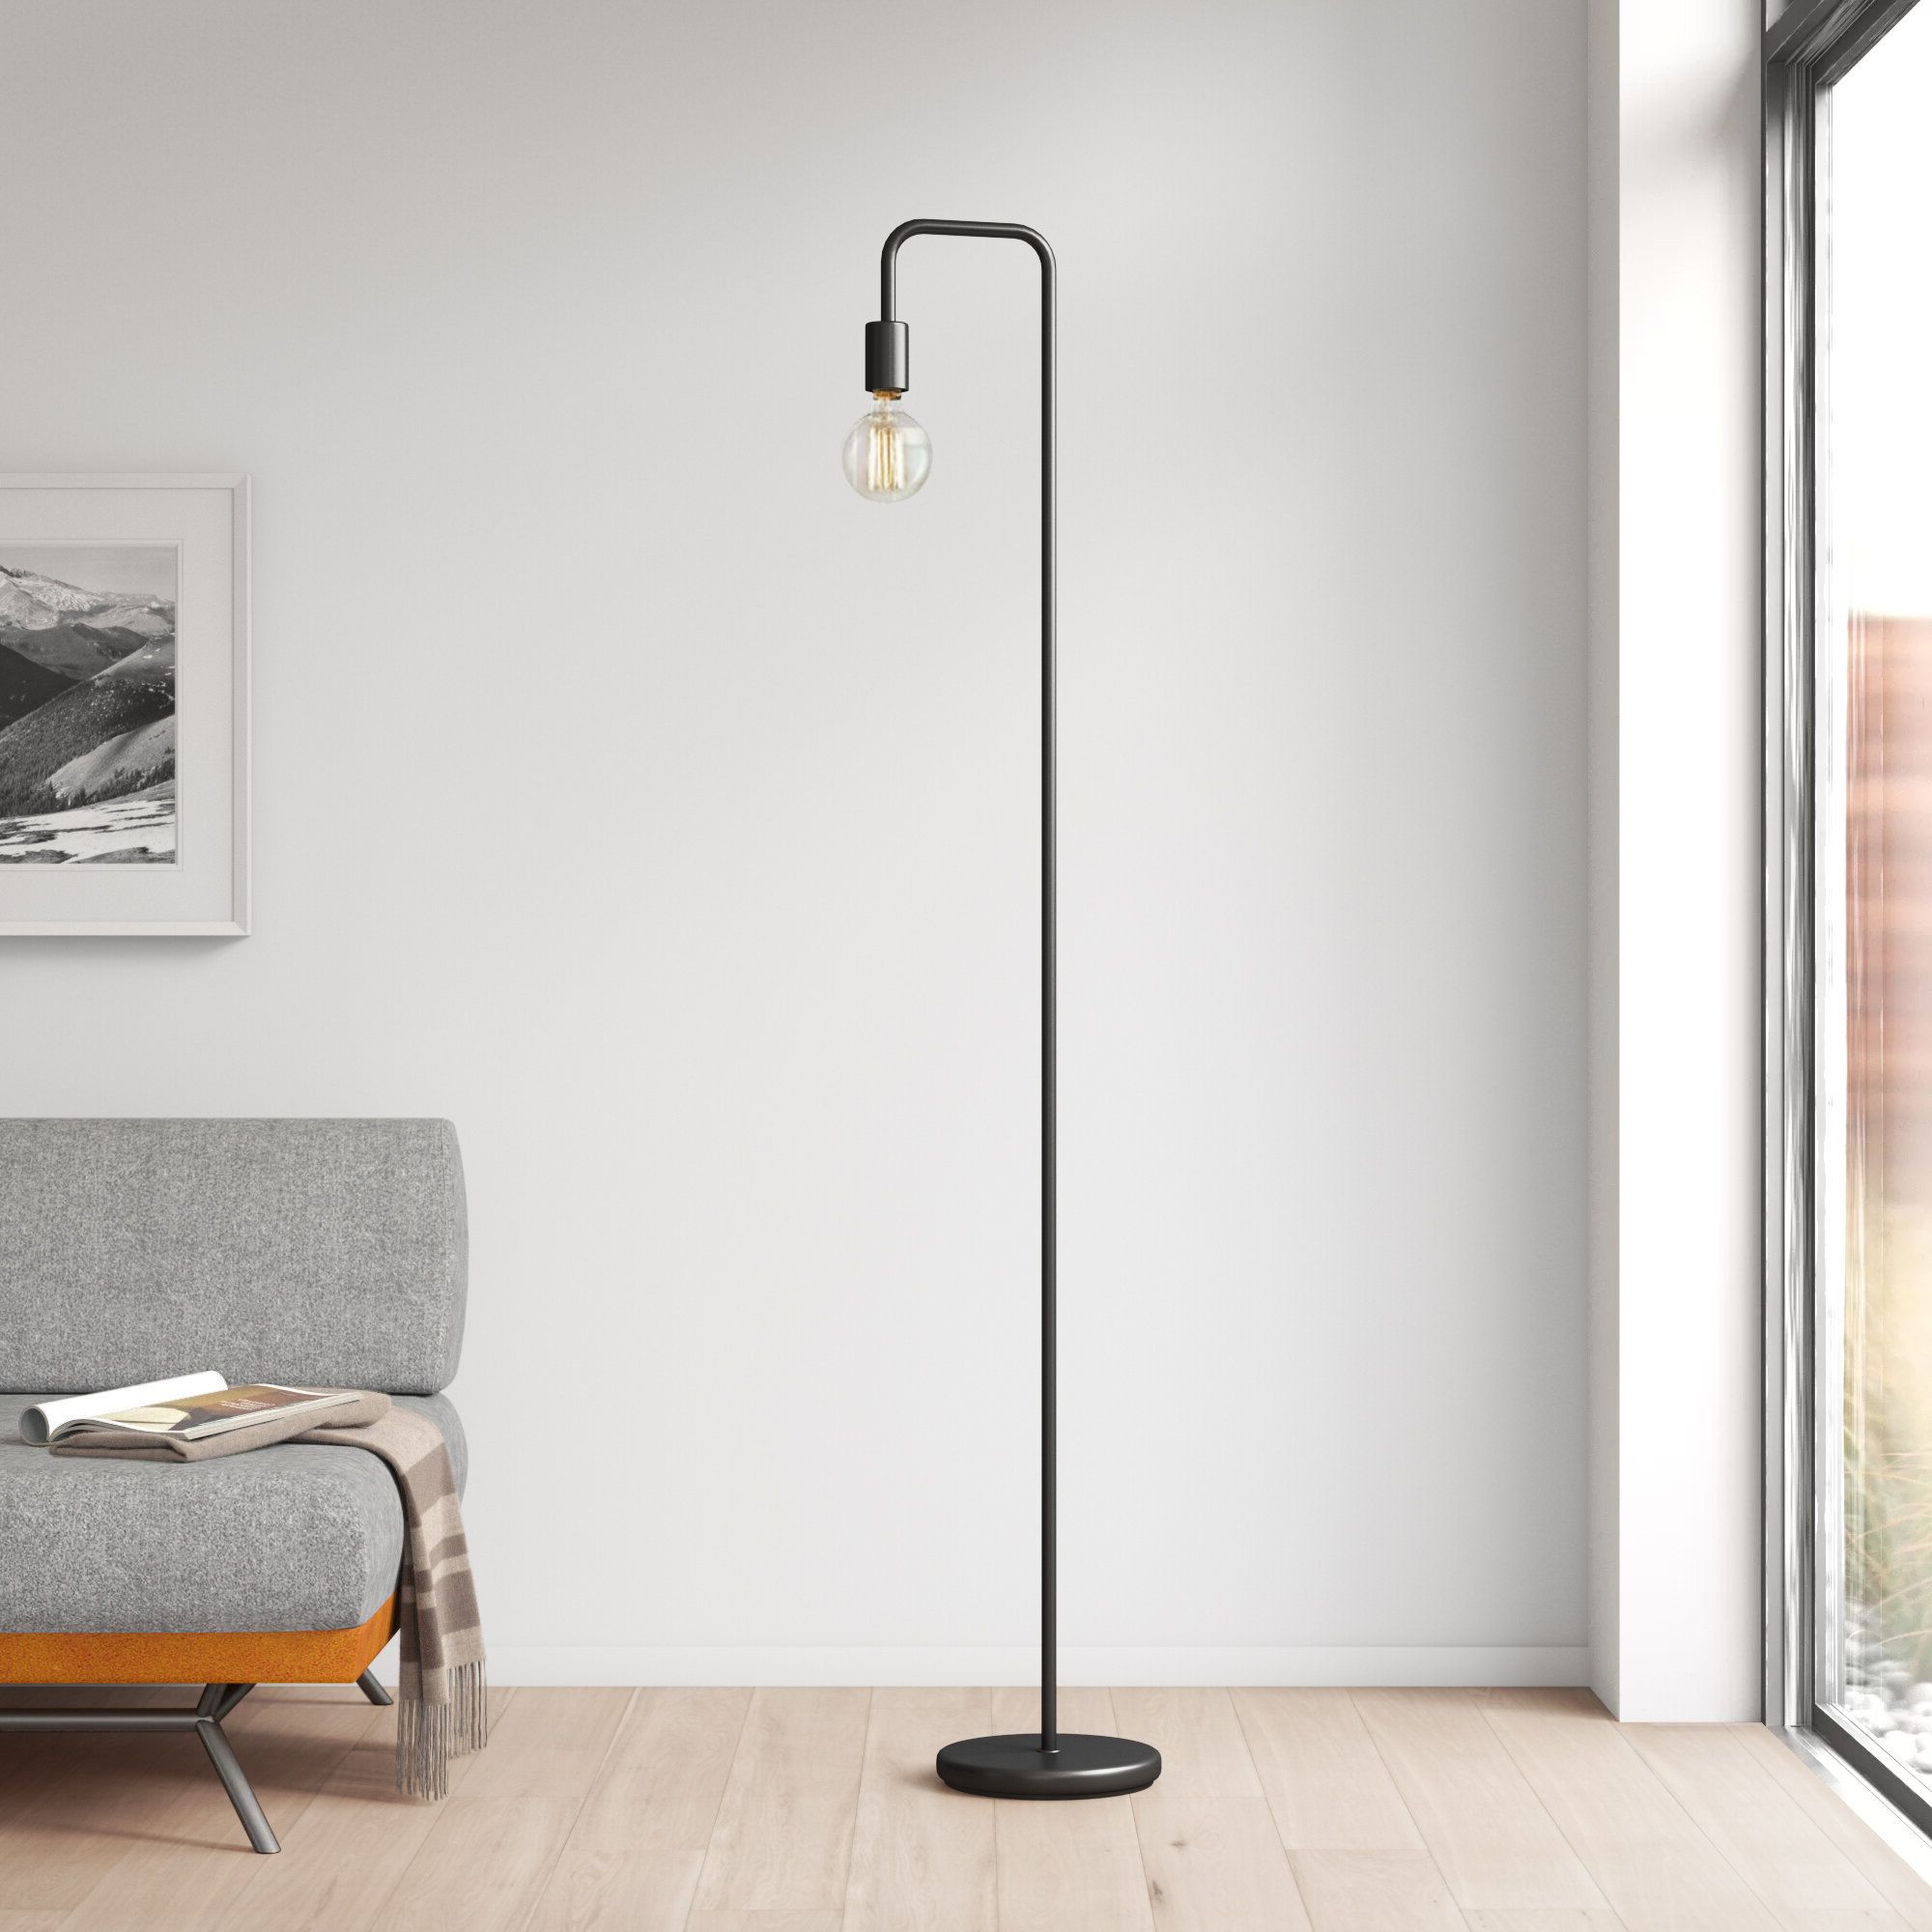 Wayfair | Extra Tall (70+ Inches) Floor Lamps Within 70 Inch Floor Lamps (View 4 of 20)